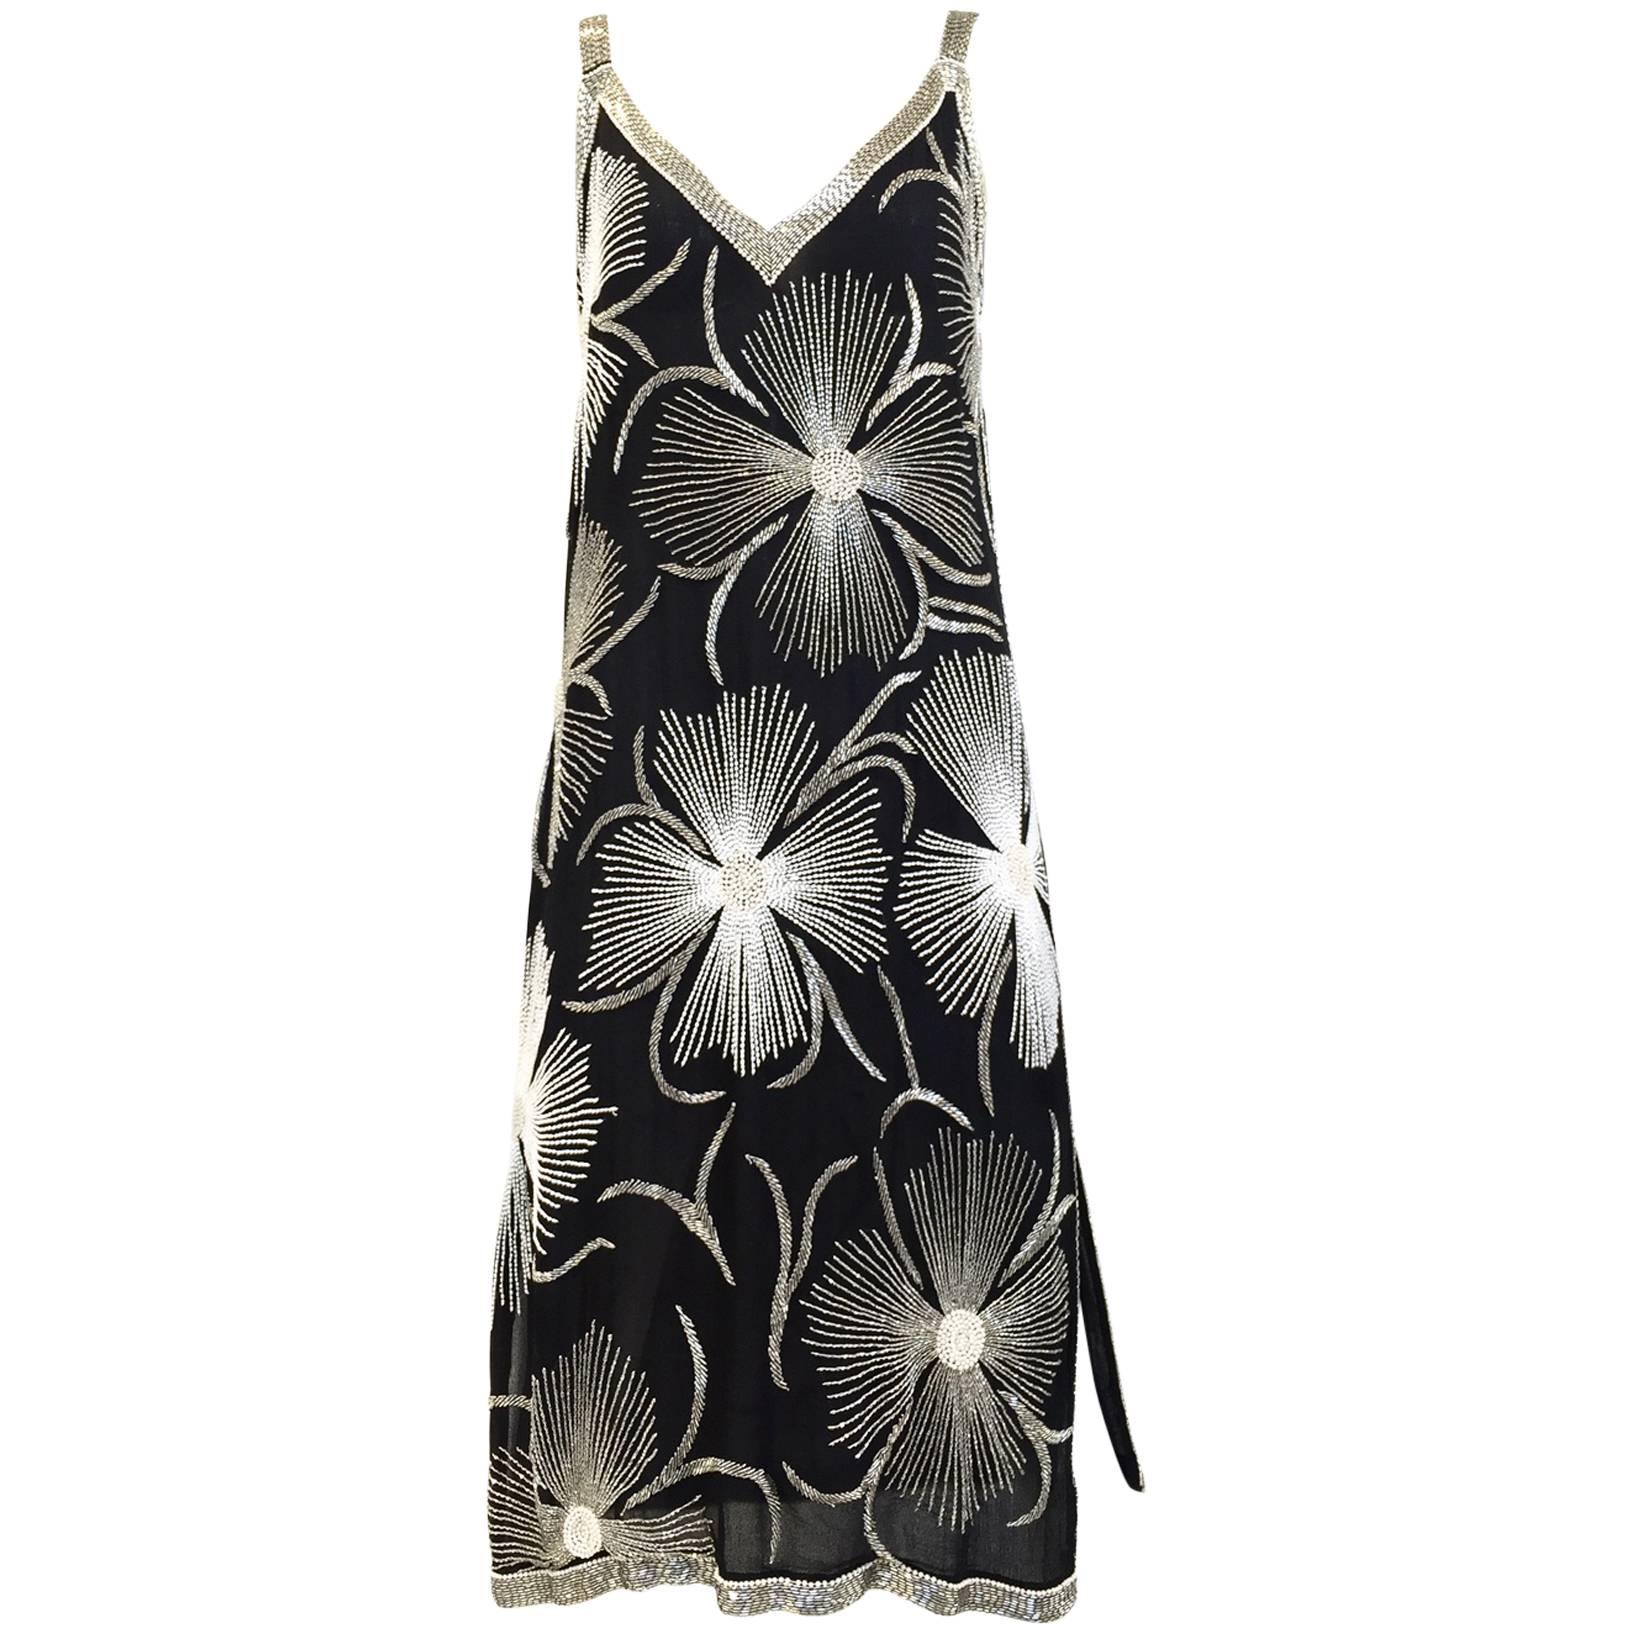 1980s Black and White Floral Silver Beads Flapper Dress